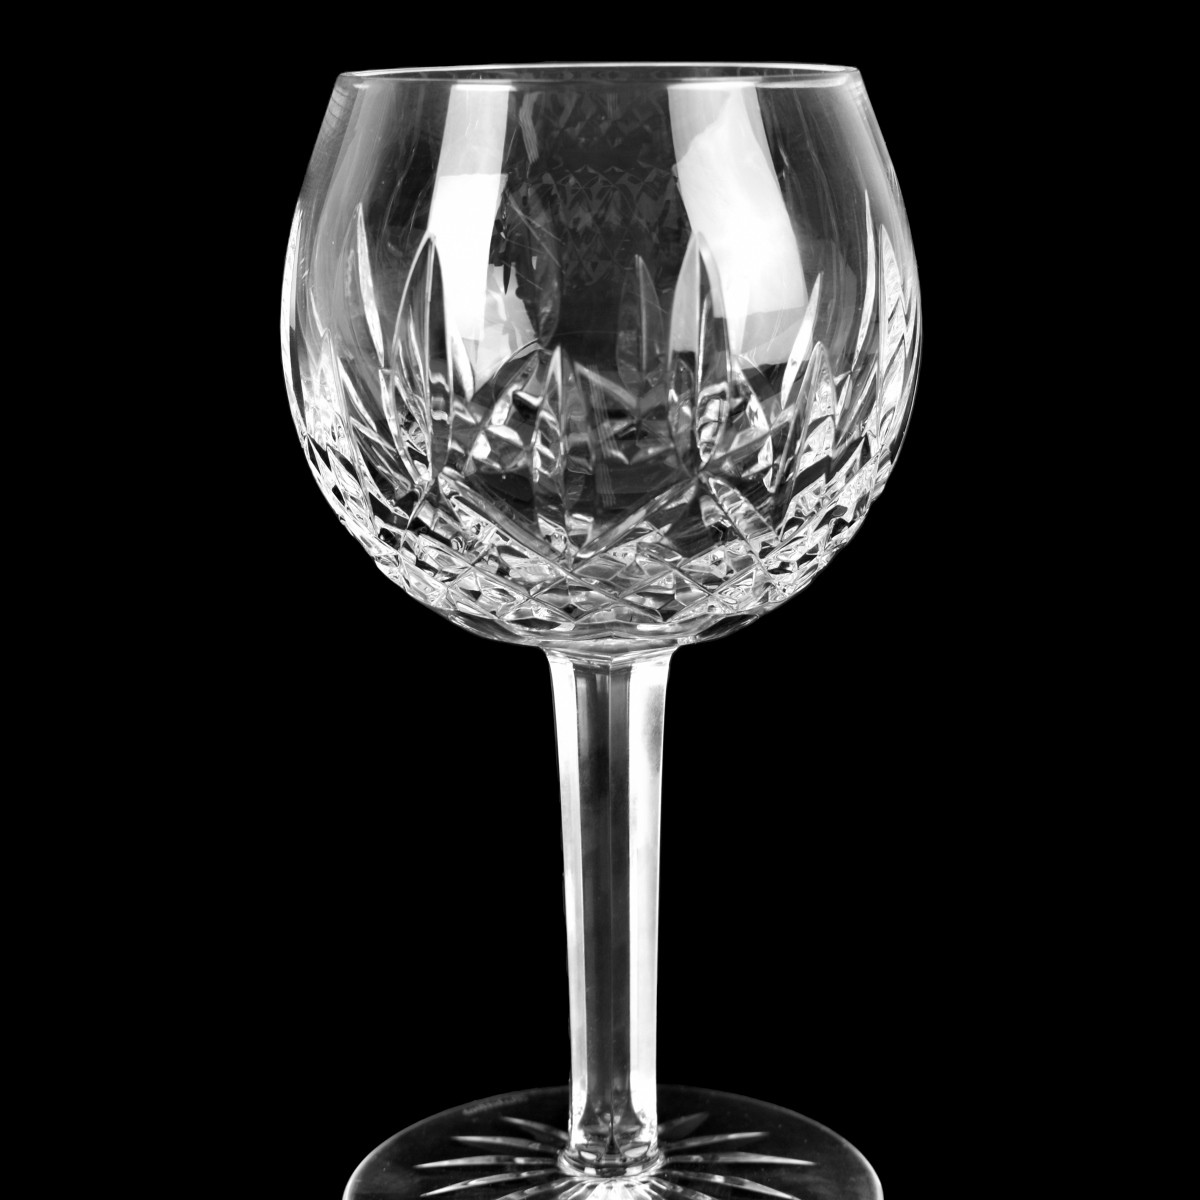 Waterford "Lismore" Balloon Wine Glasses